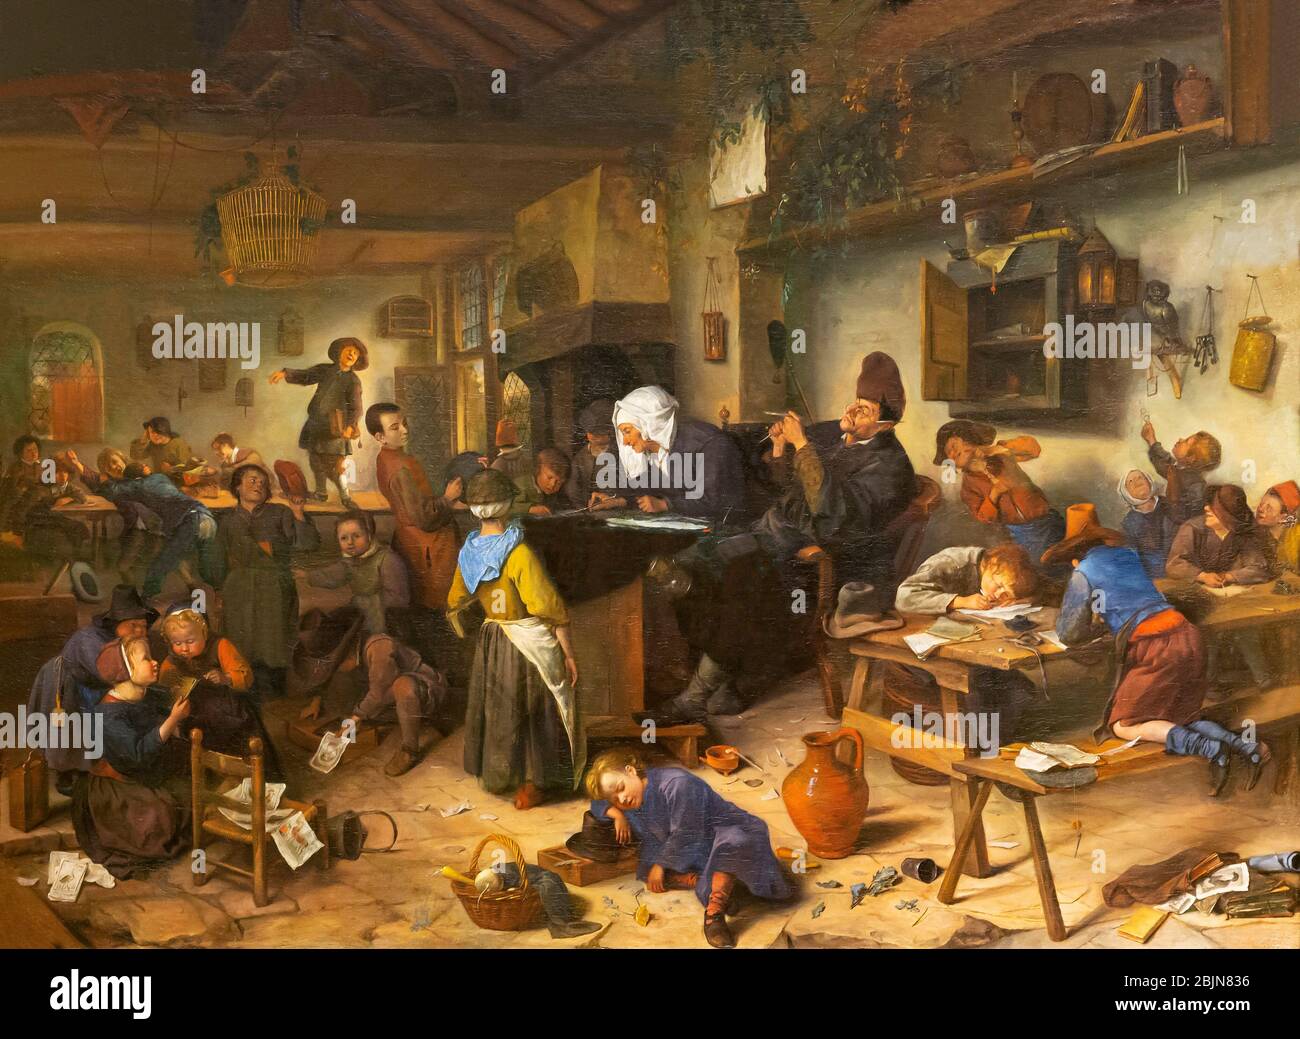 A School for Boys and Girls, Jan Steen, circa 1670, Stock Photo